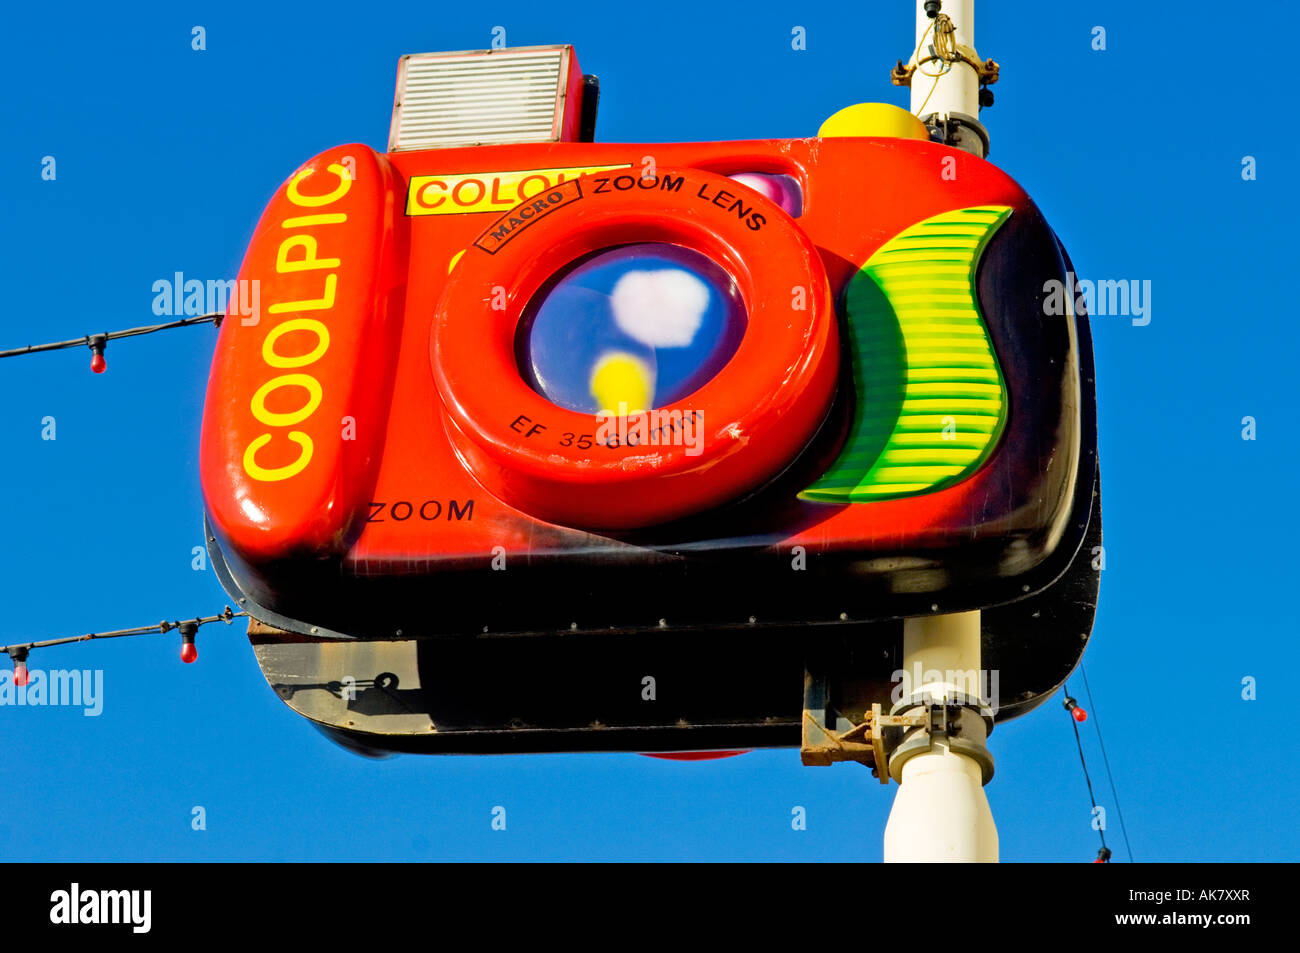 Giant plastic camera suspended from pole against blue sky in summer Stock Photo